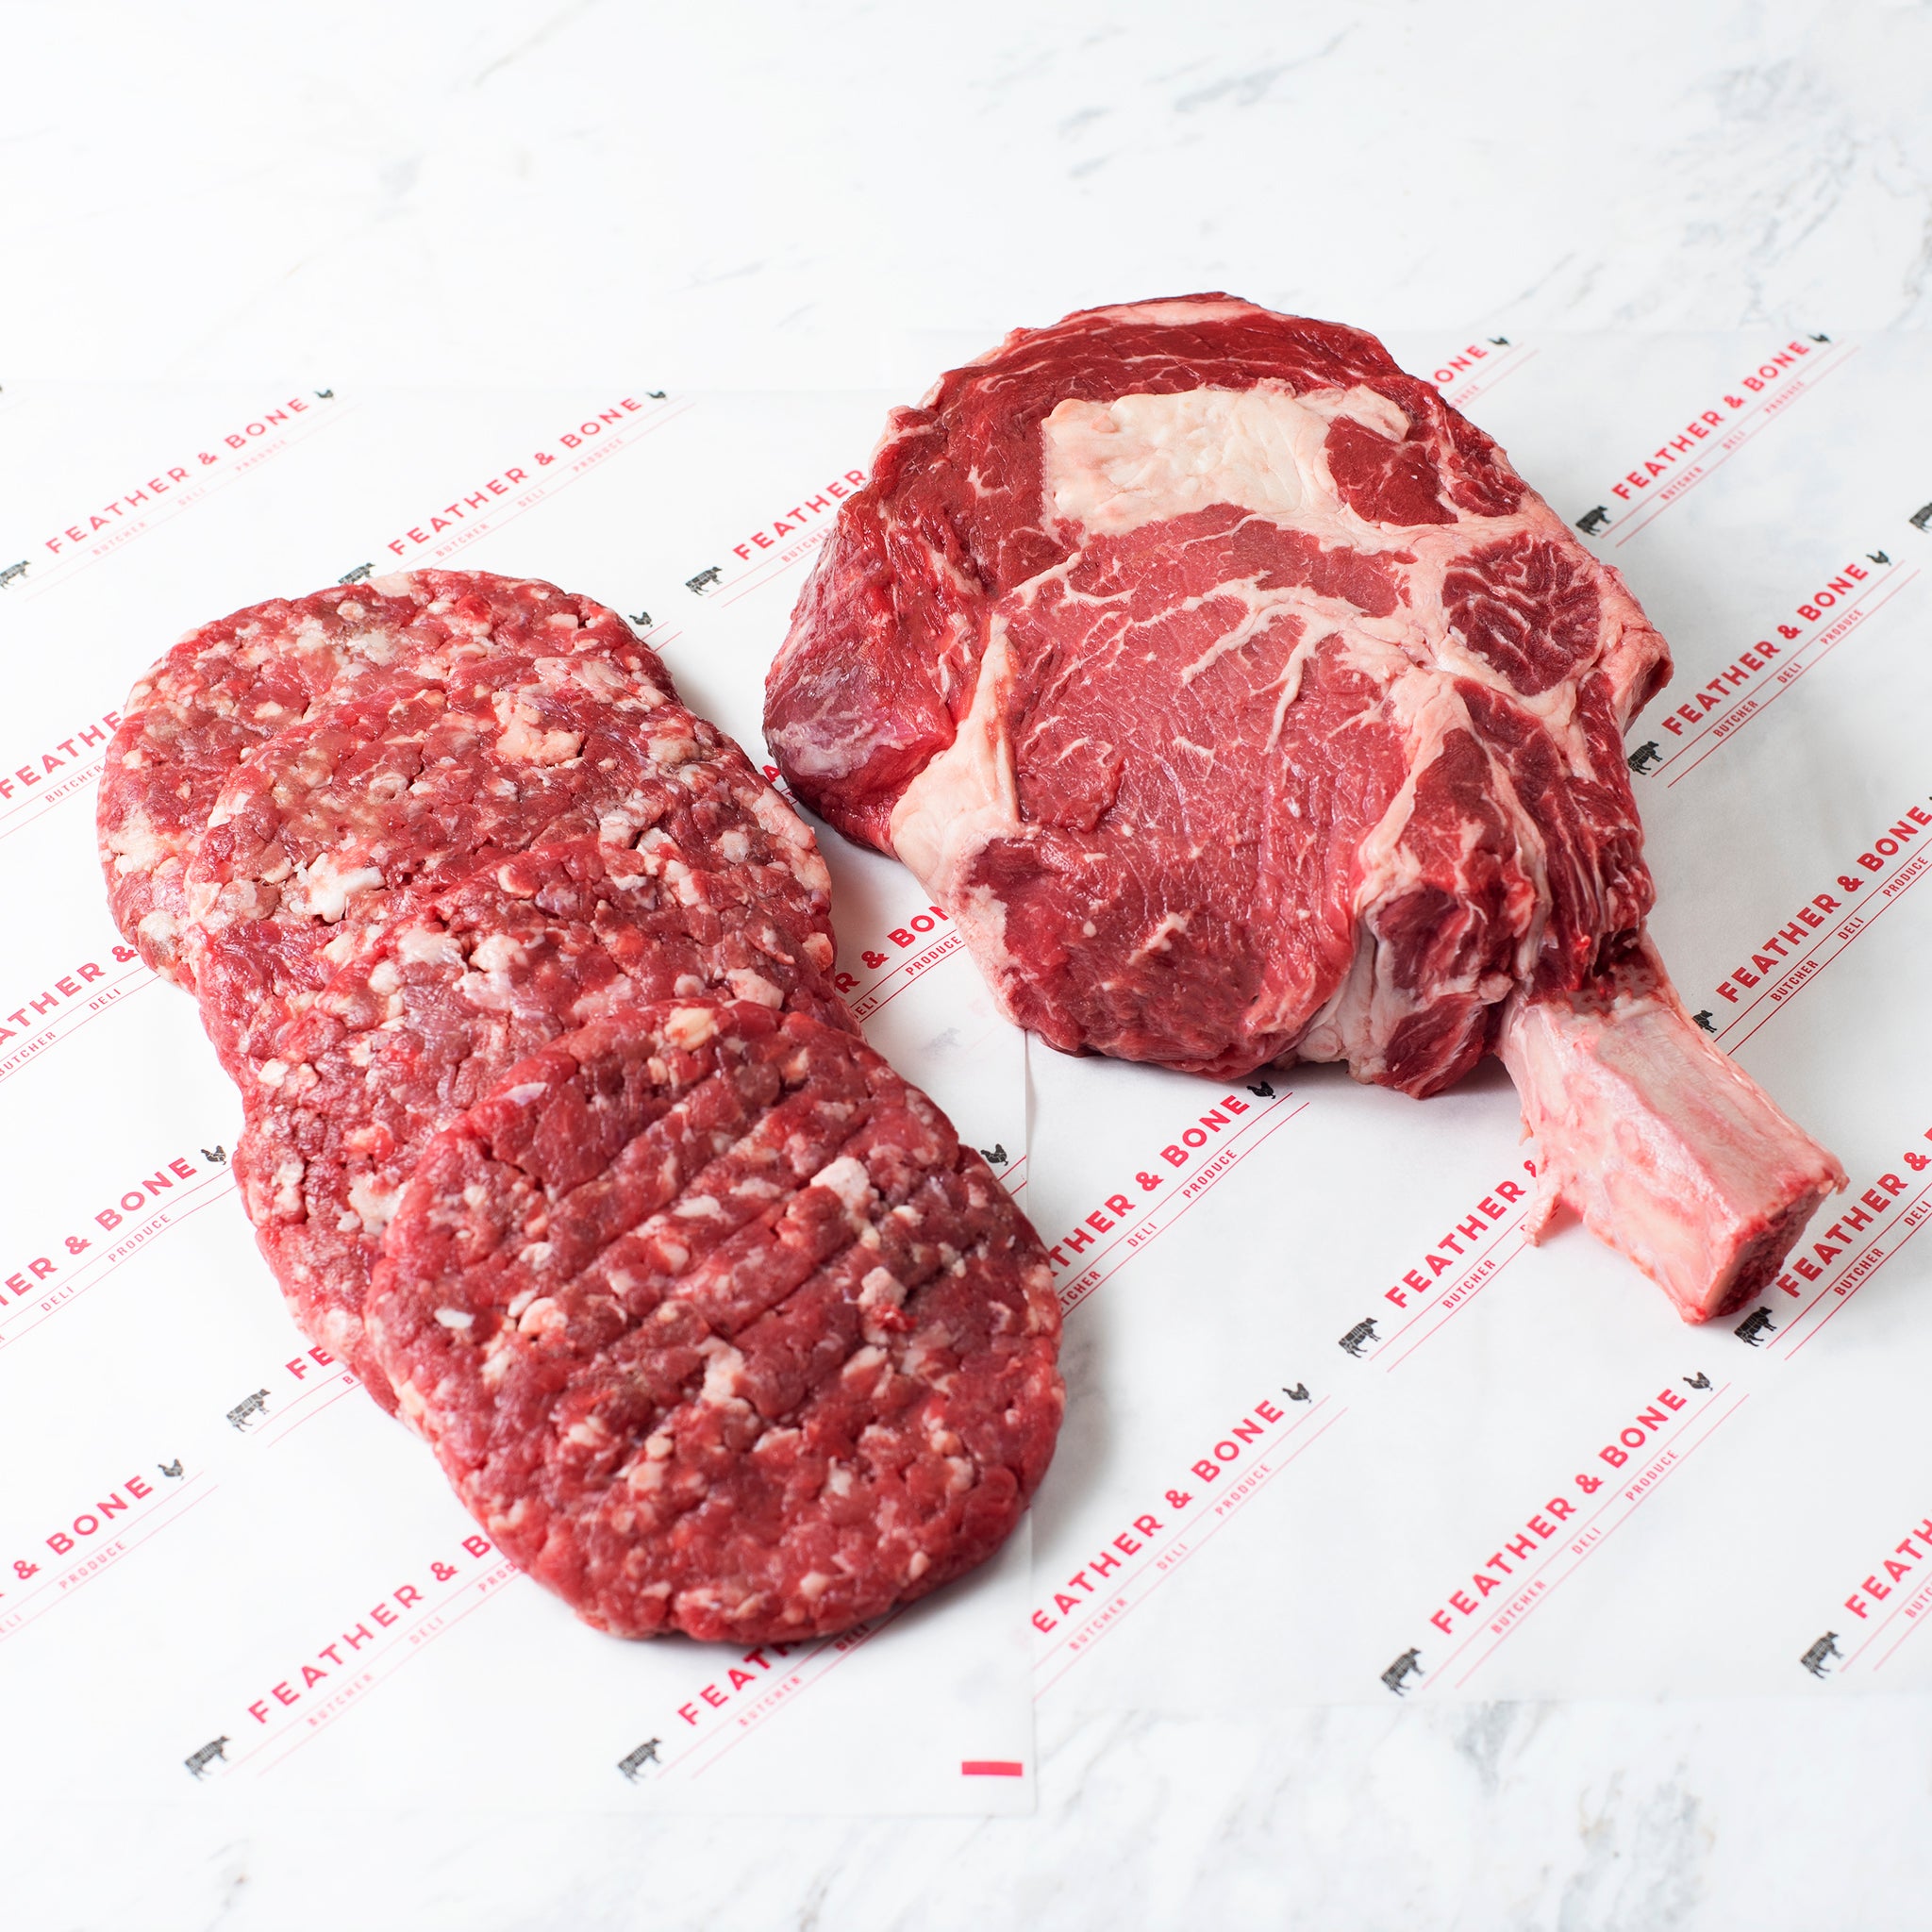 4 160g Grass-Fed Beef Patties and a 1kg Grain-Fed Bone-In Ribeye on Feather & Bone branded paper.